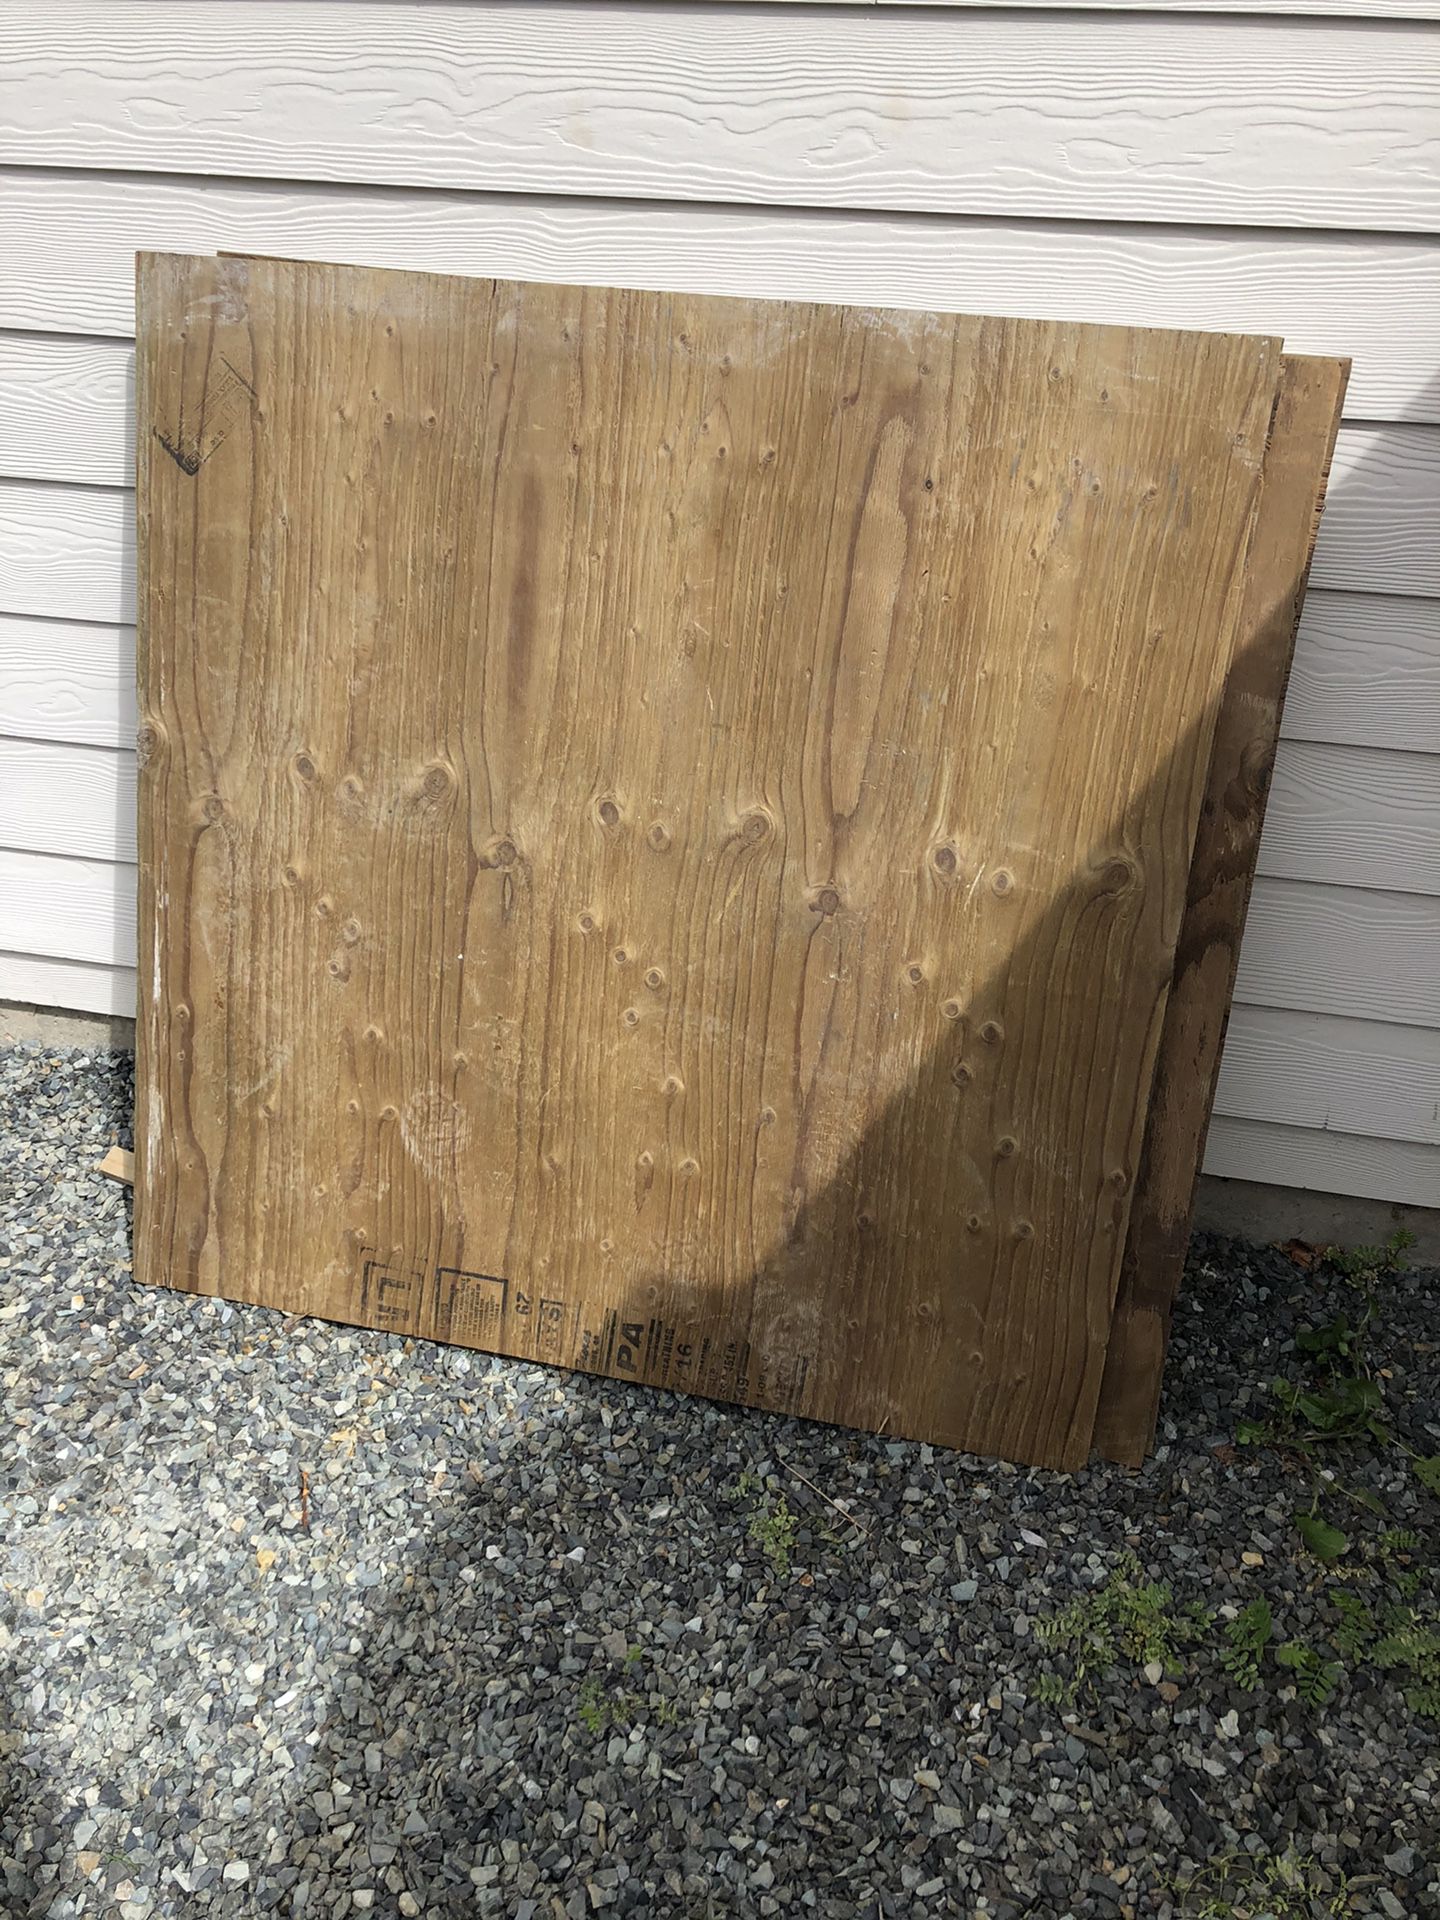 4x4’ treated plywood., 1/2 inch .Total of five. Good condition.